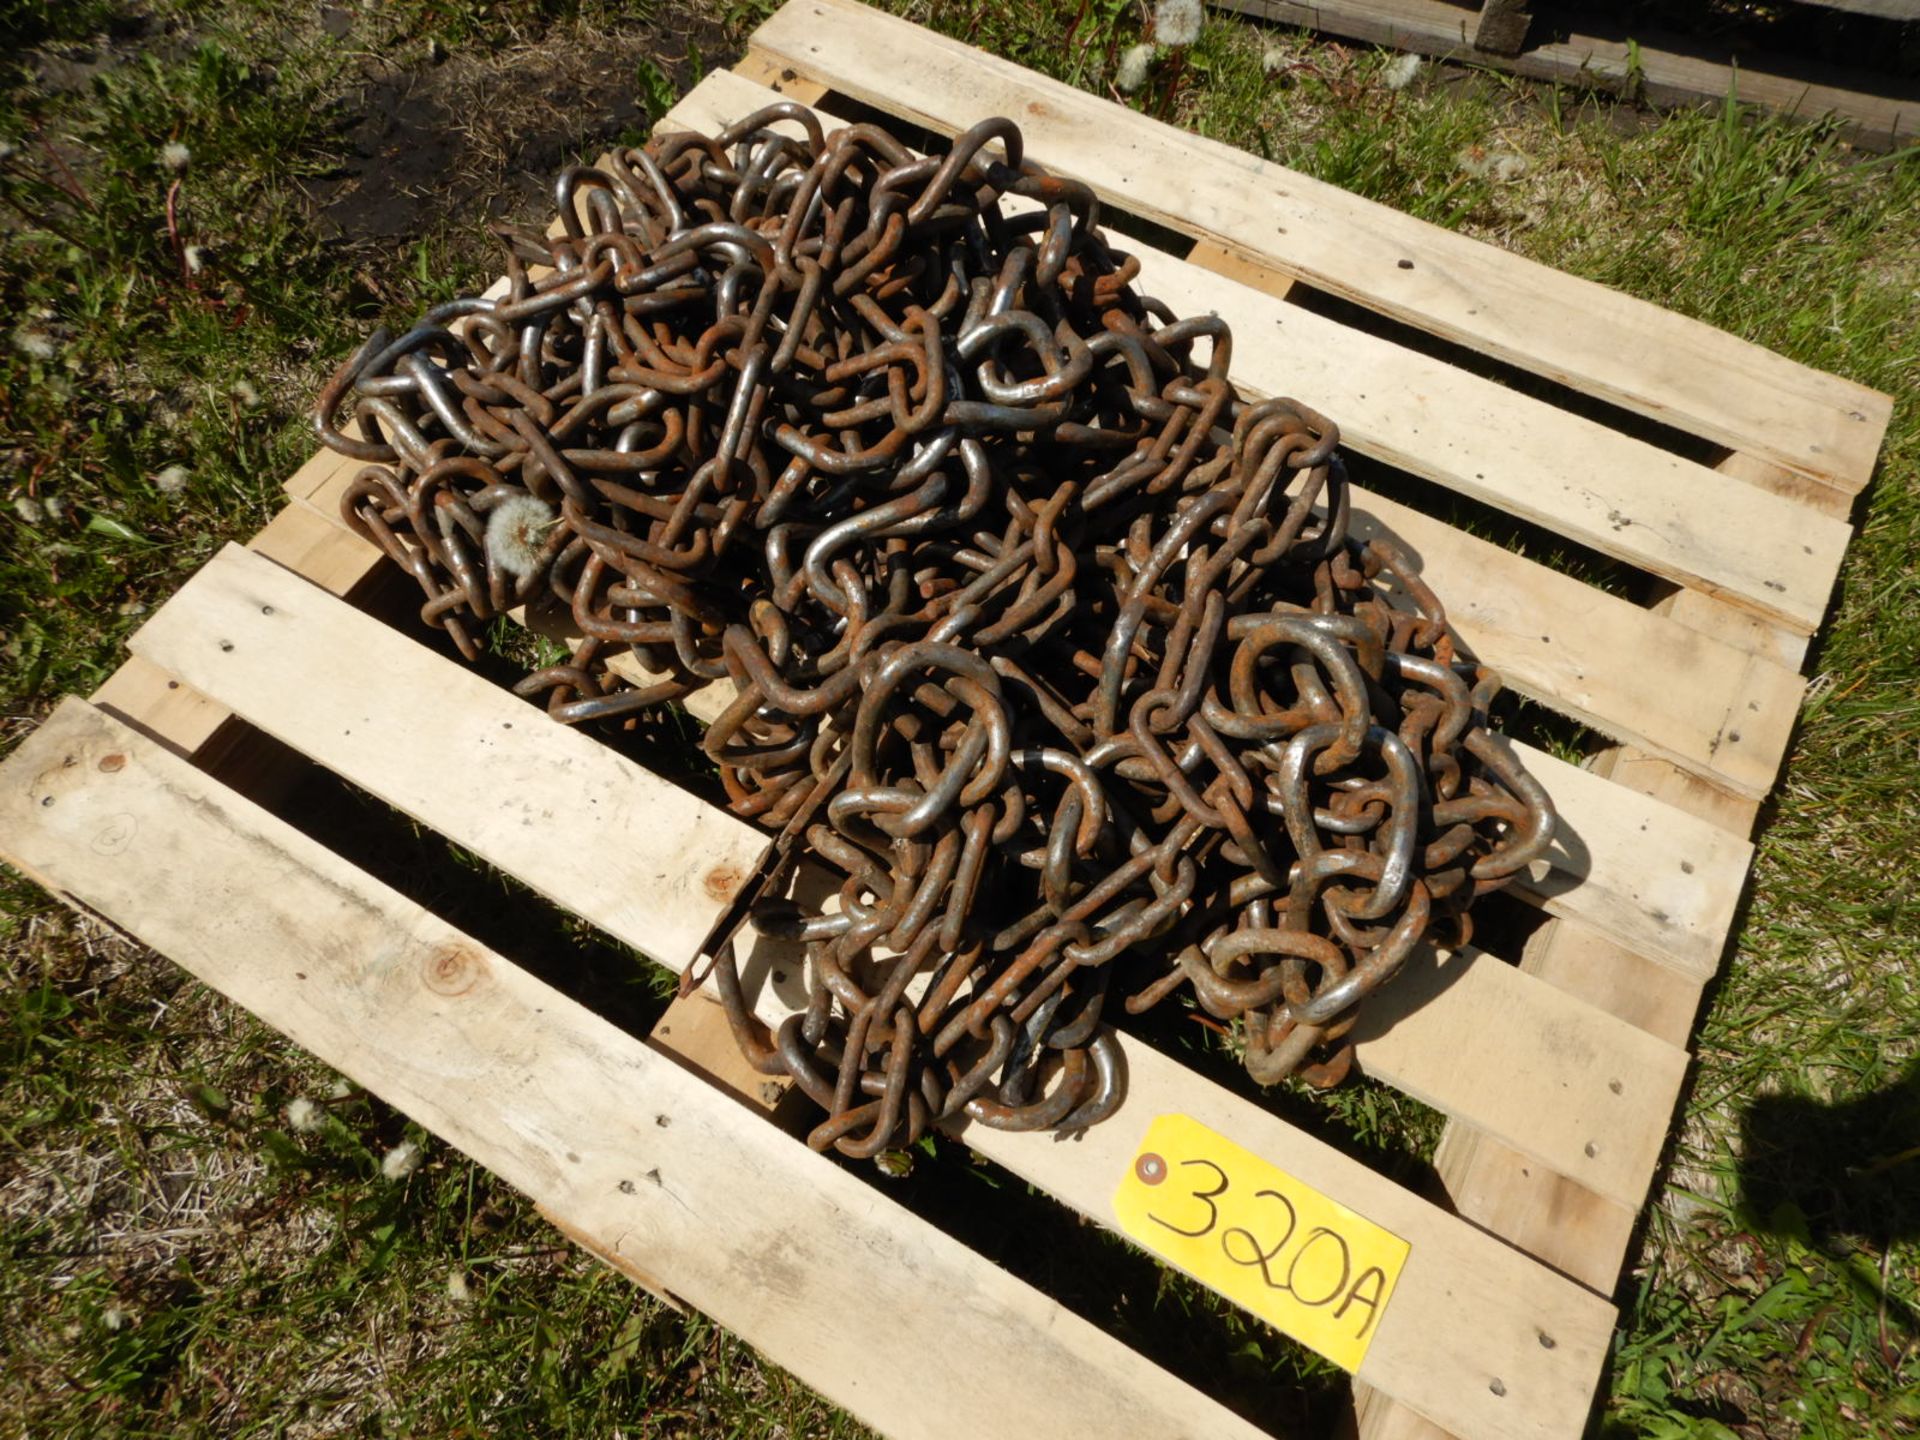 SET OF TRACTOR CHAINS - SIZE UNKNOWN